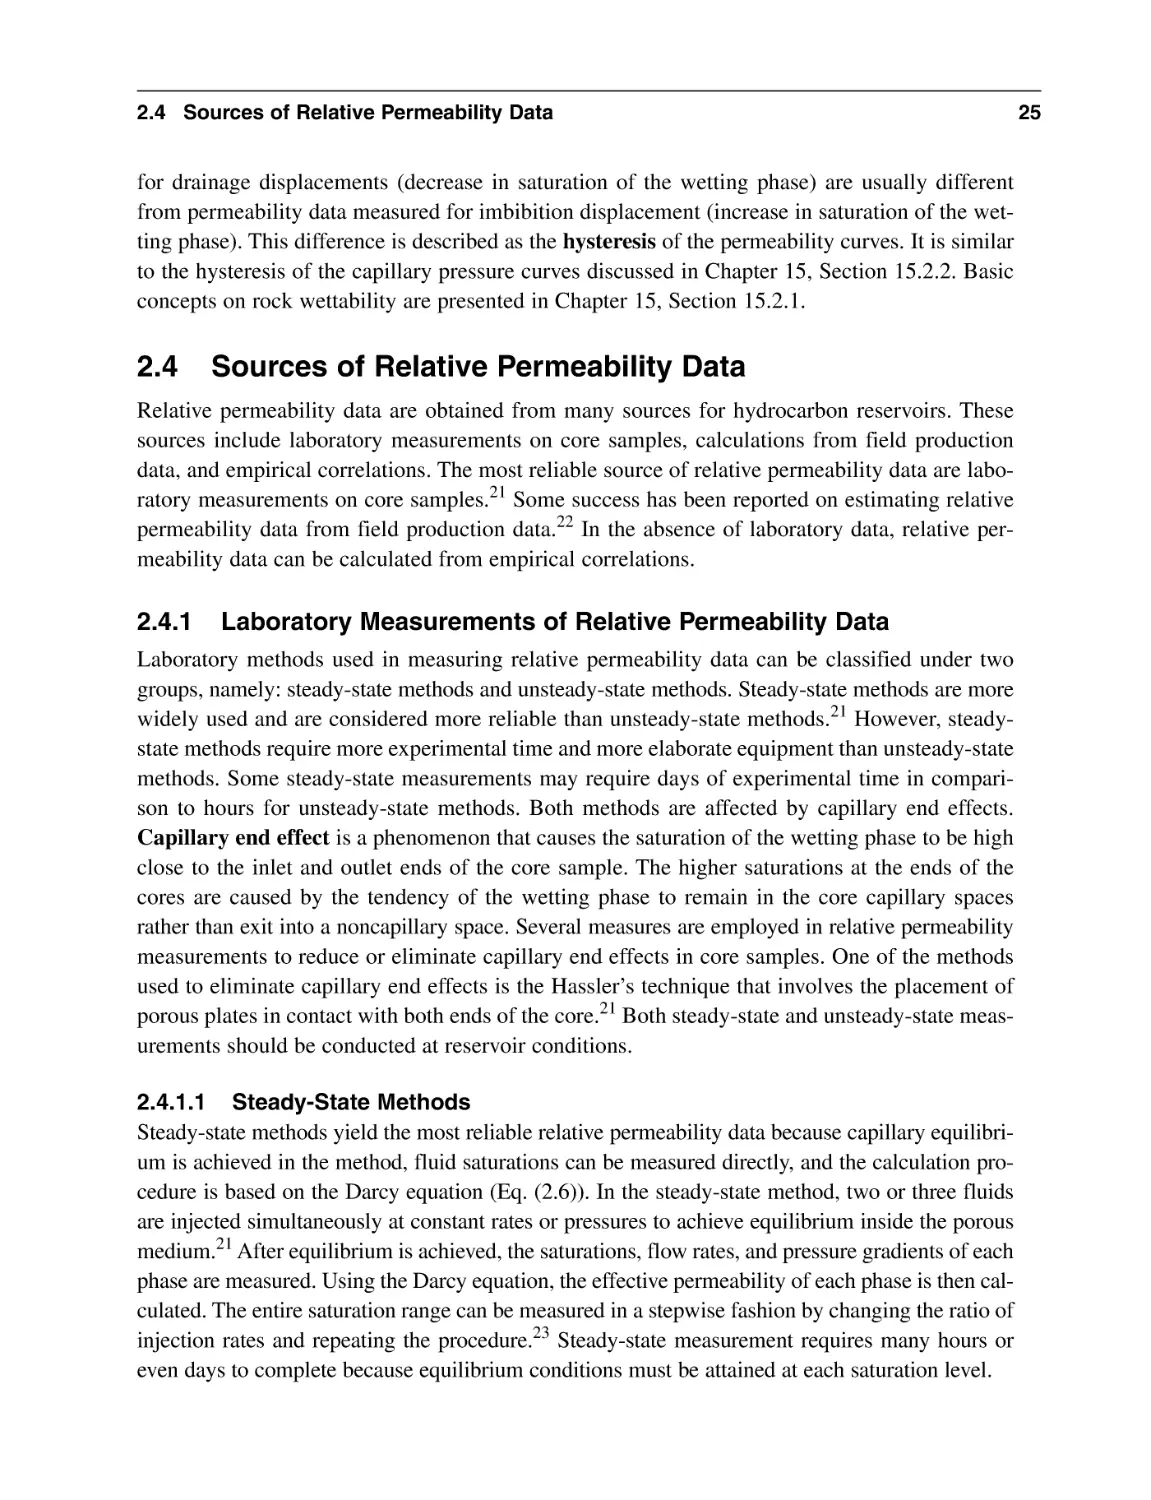 2.4 Sources of Relative Permeability Data
2.4.1 Laboratory Measurements of Relative Permeability Data